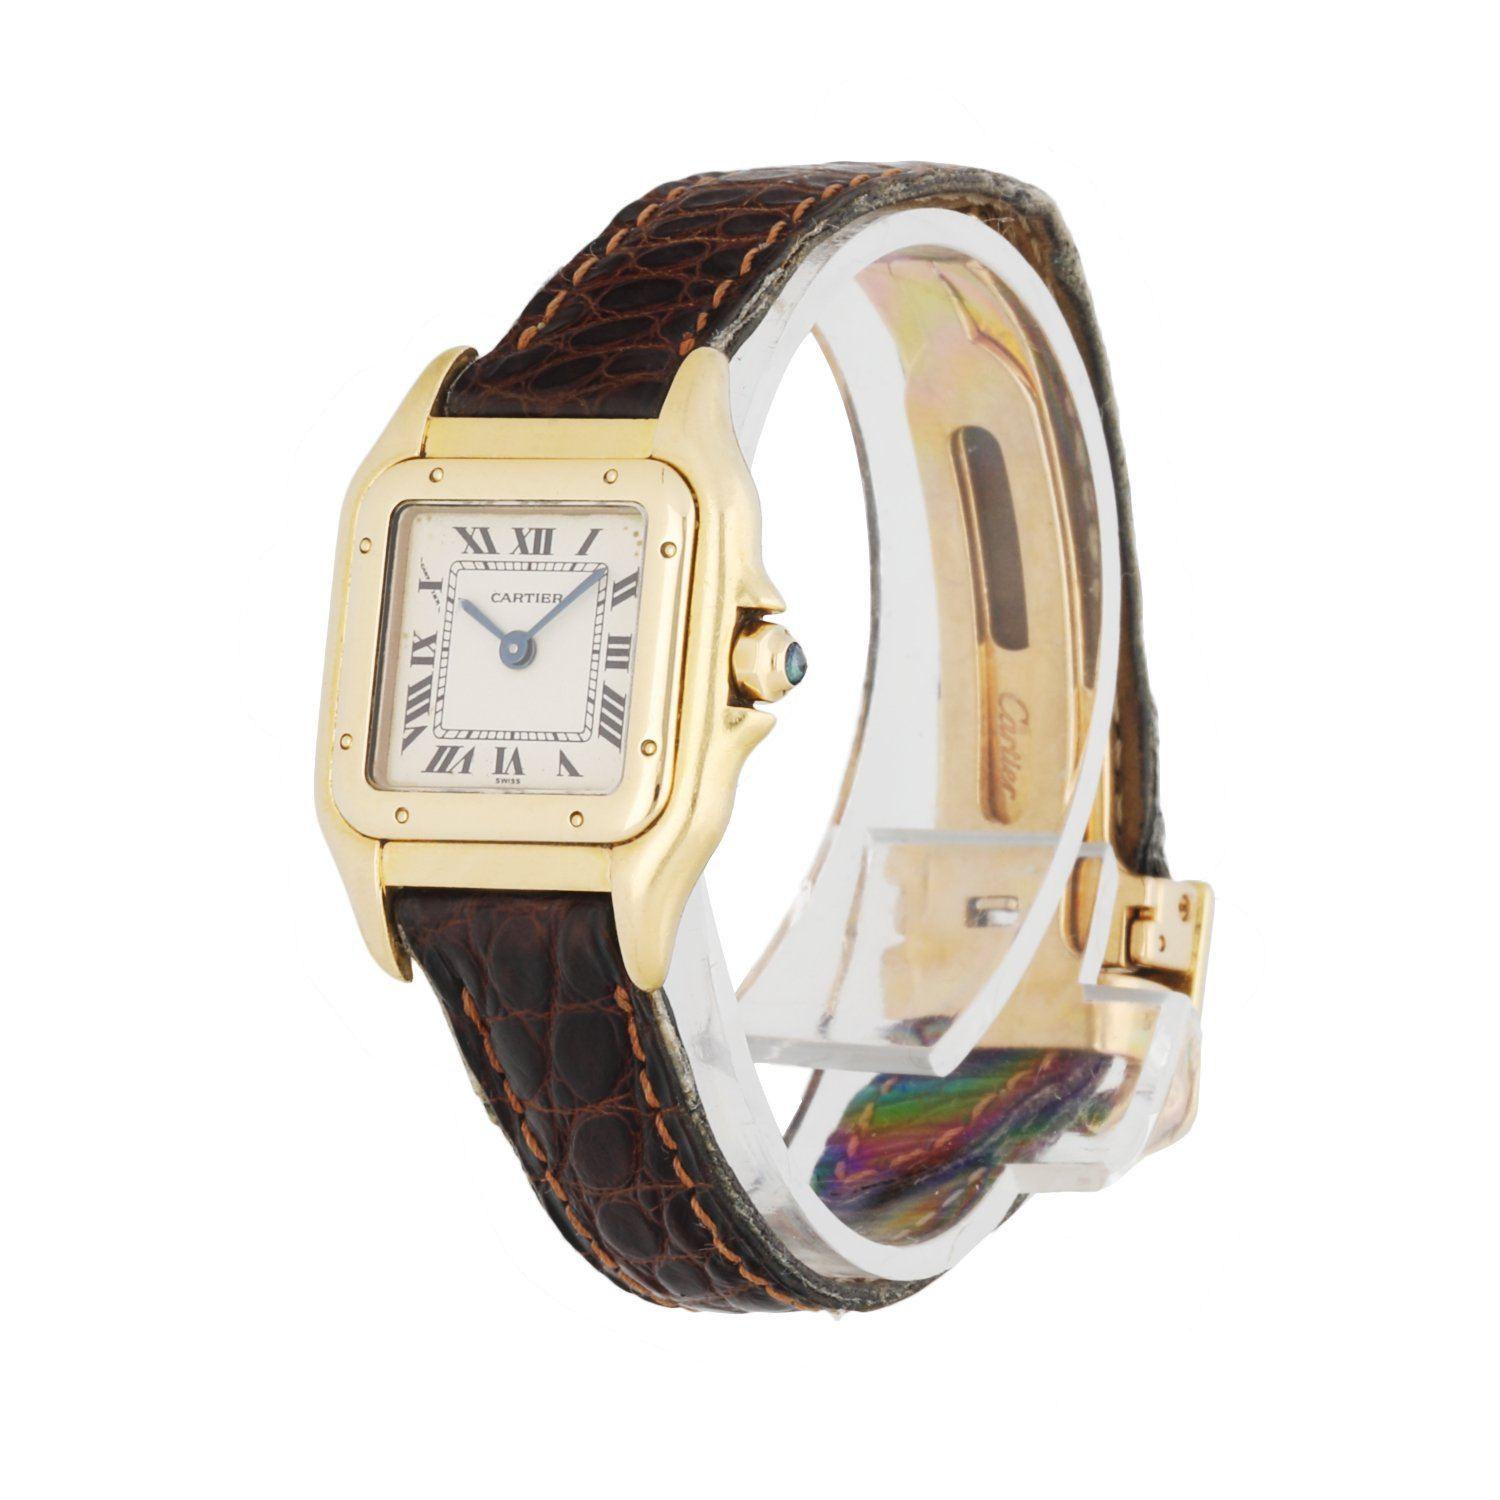 Cartier PanthereÂ 8057929 18K Yellow Gold Ladies Watch.Â 22mm 18k Yellow gold case. 18K Yellow Gold Stationary bezel. Off-White dial with Blue steel hands andÂ Roman numeral hour markers. Minute markers on the inner dial. Brown leather strapÂ with